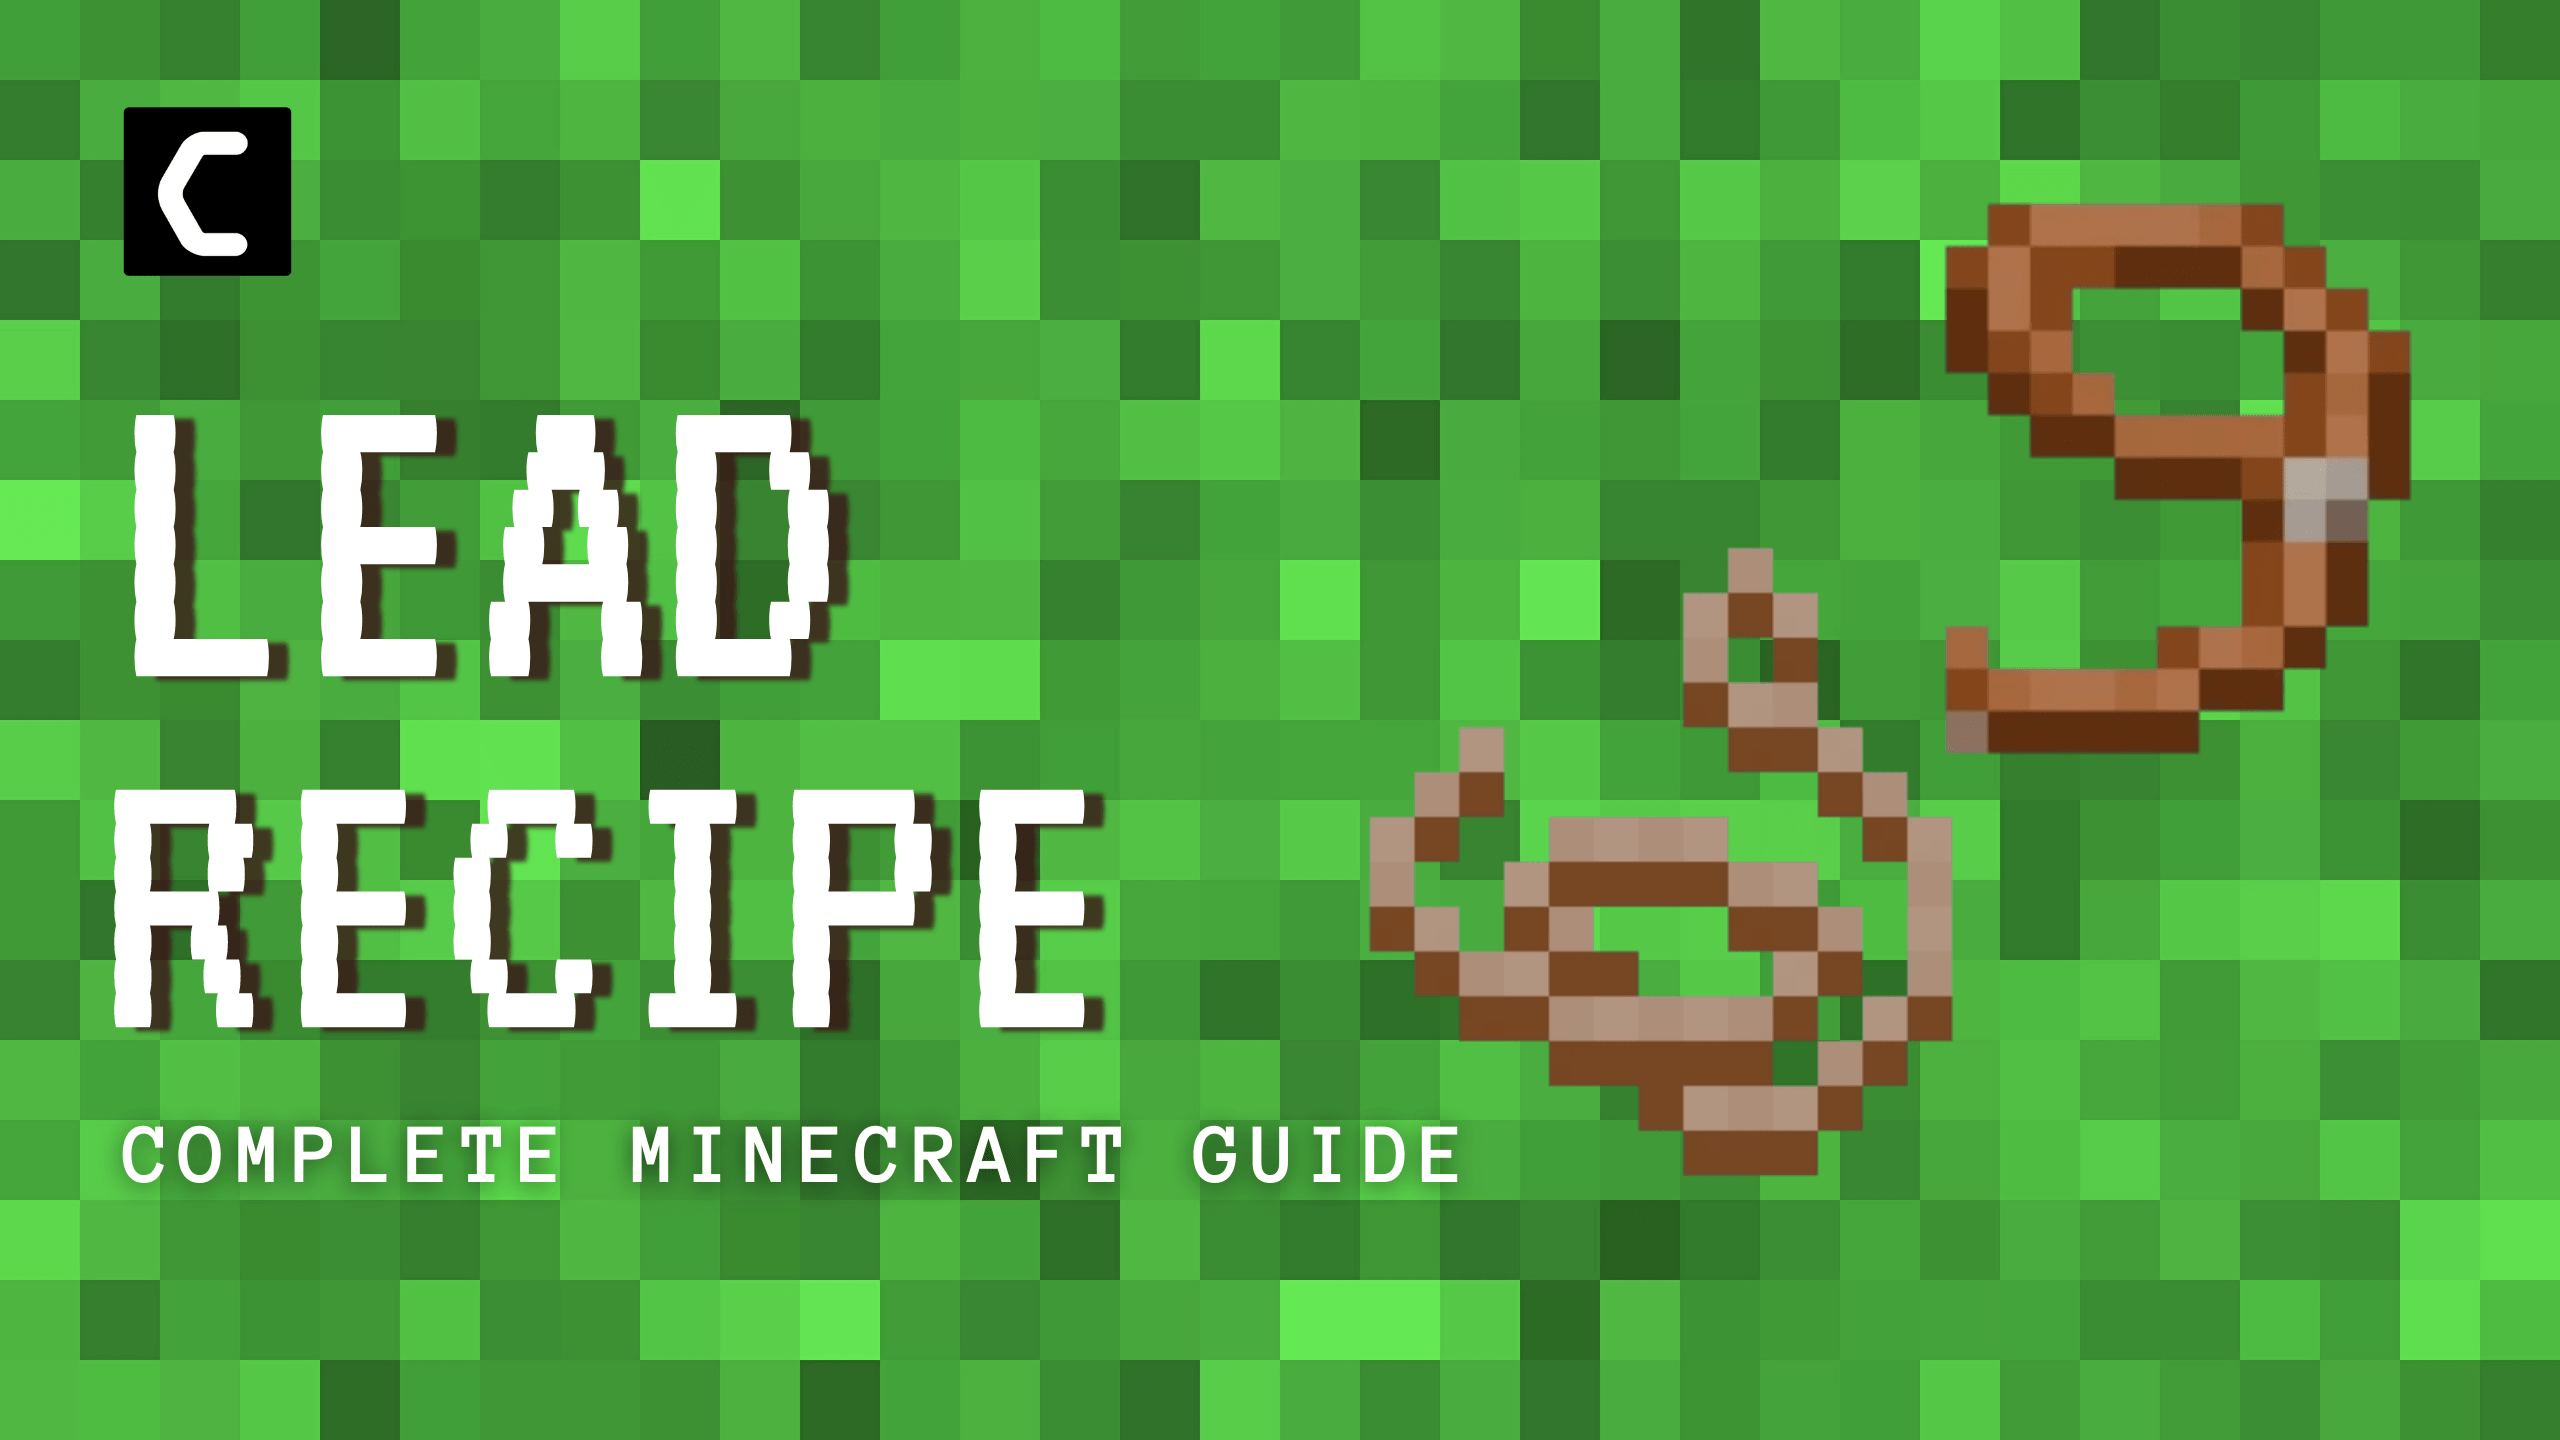 How to Make Lead in Minecraft